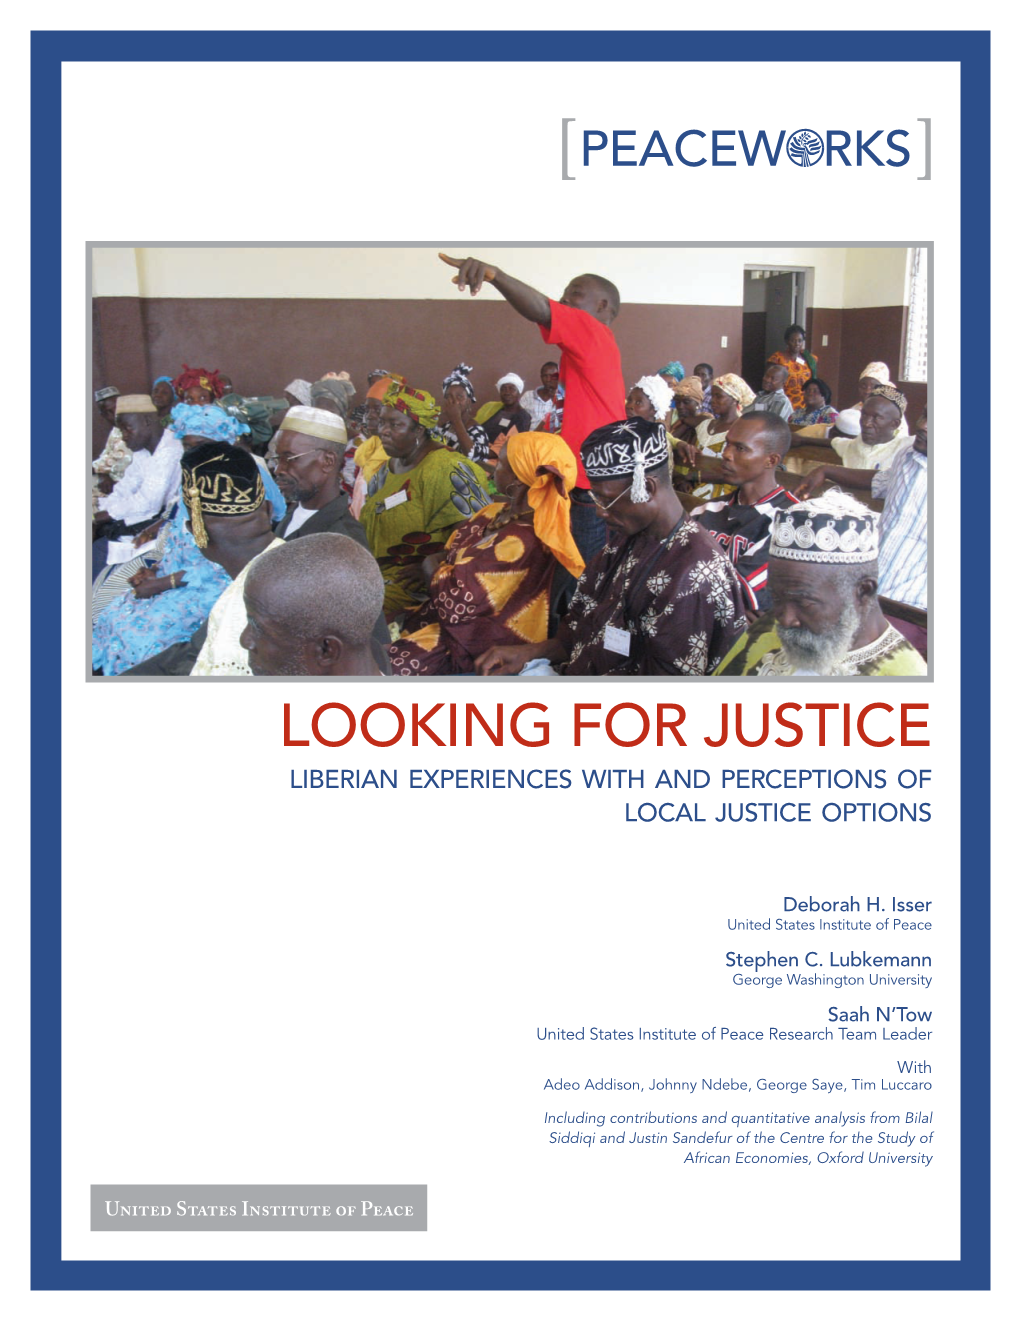 Looking for Justice: Liberian Experiences with and Perceptions of Local Justice Options